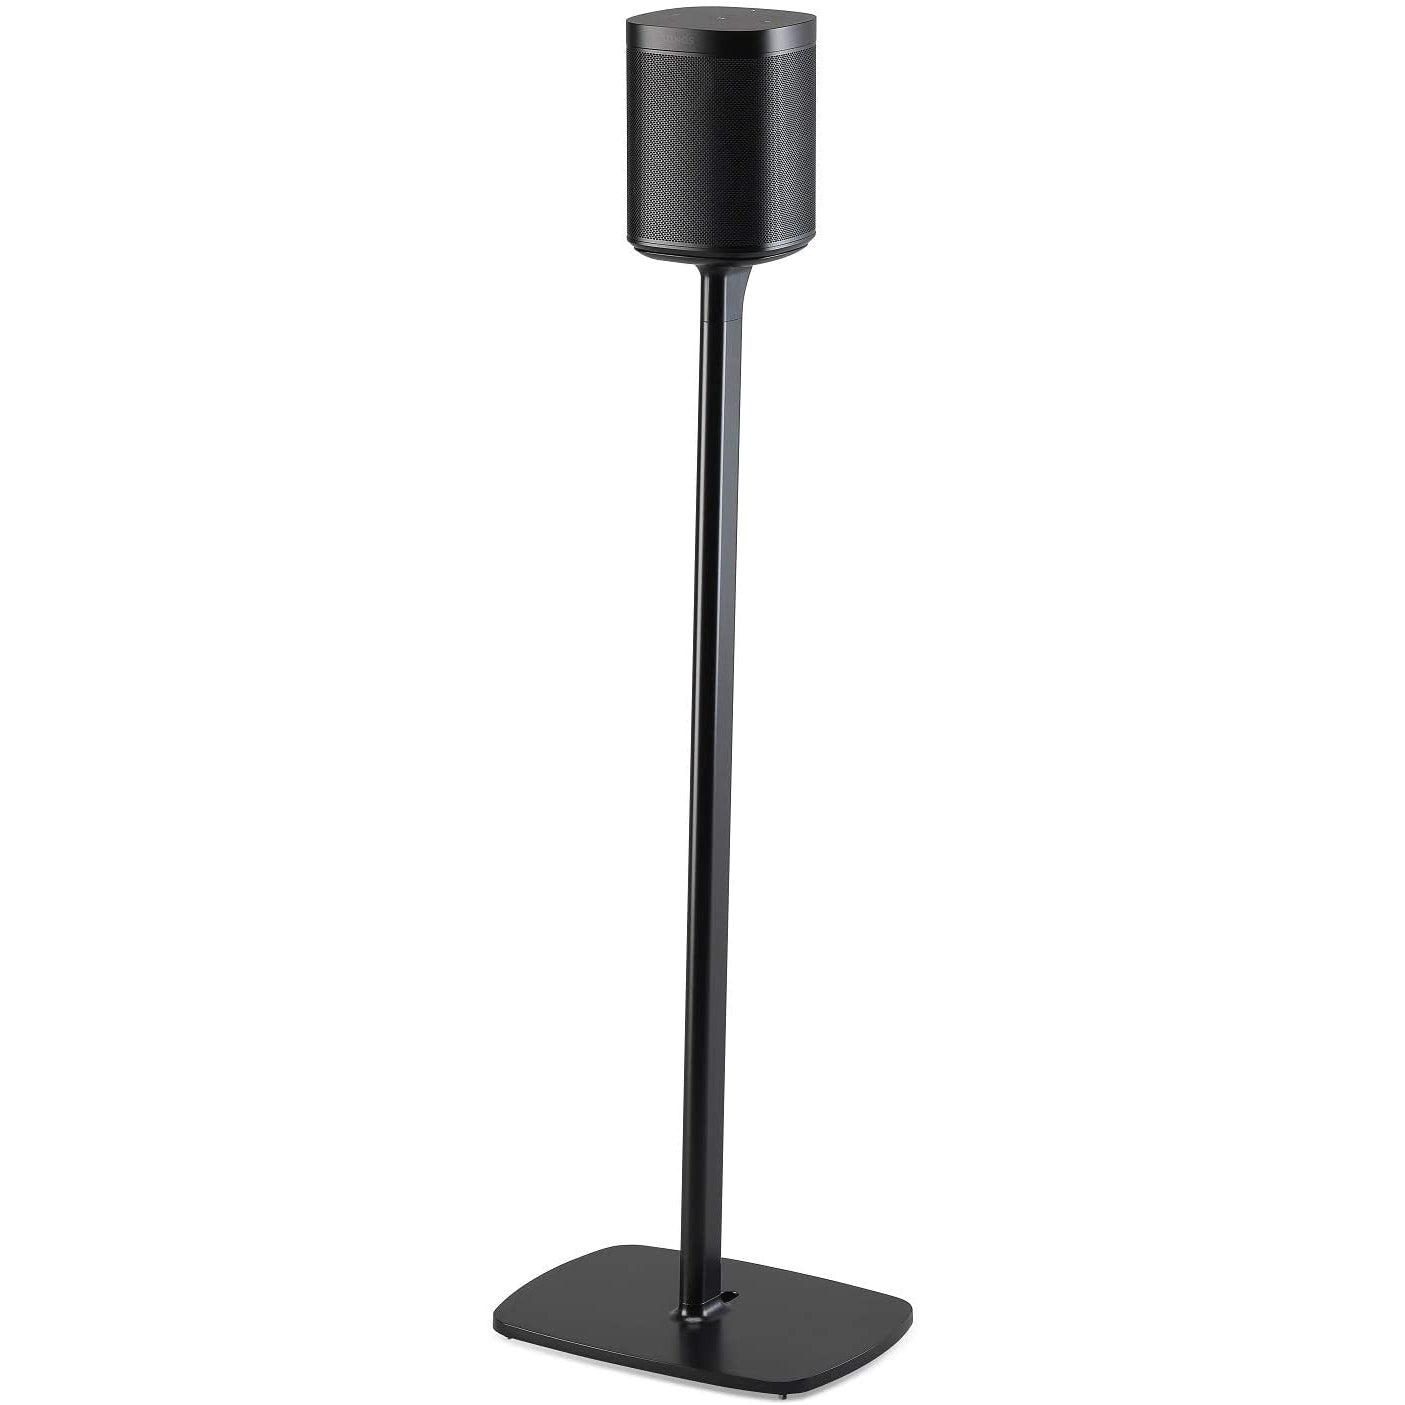 Flexson S1-FS Floor Stand for Sonos One, Black - Good Condition